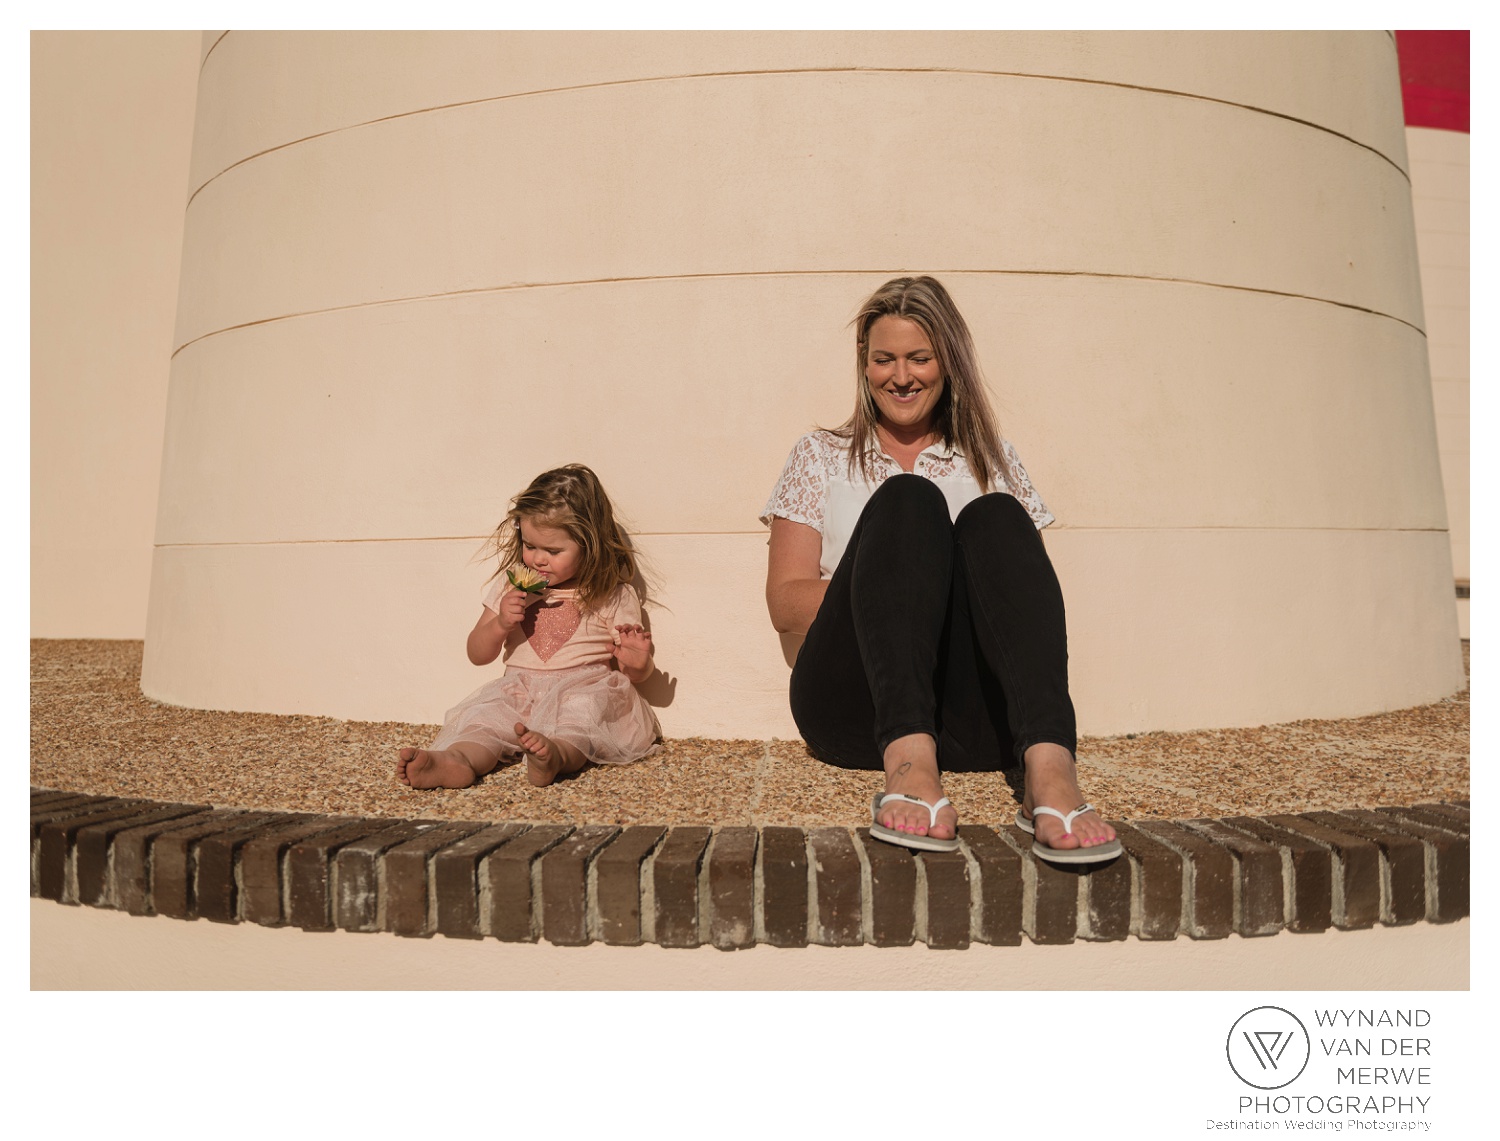 Beautiful family shoot with Simone and her daughter